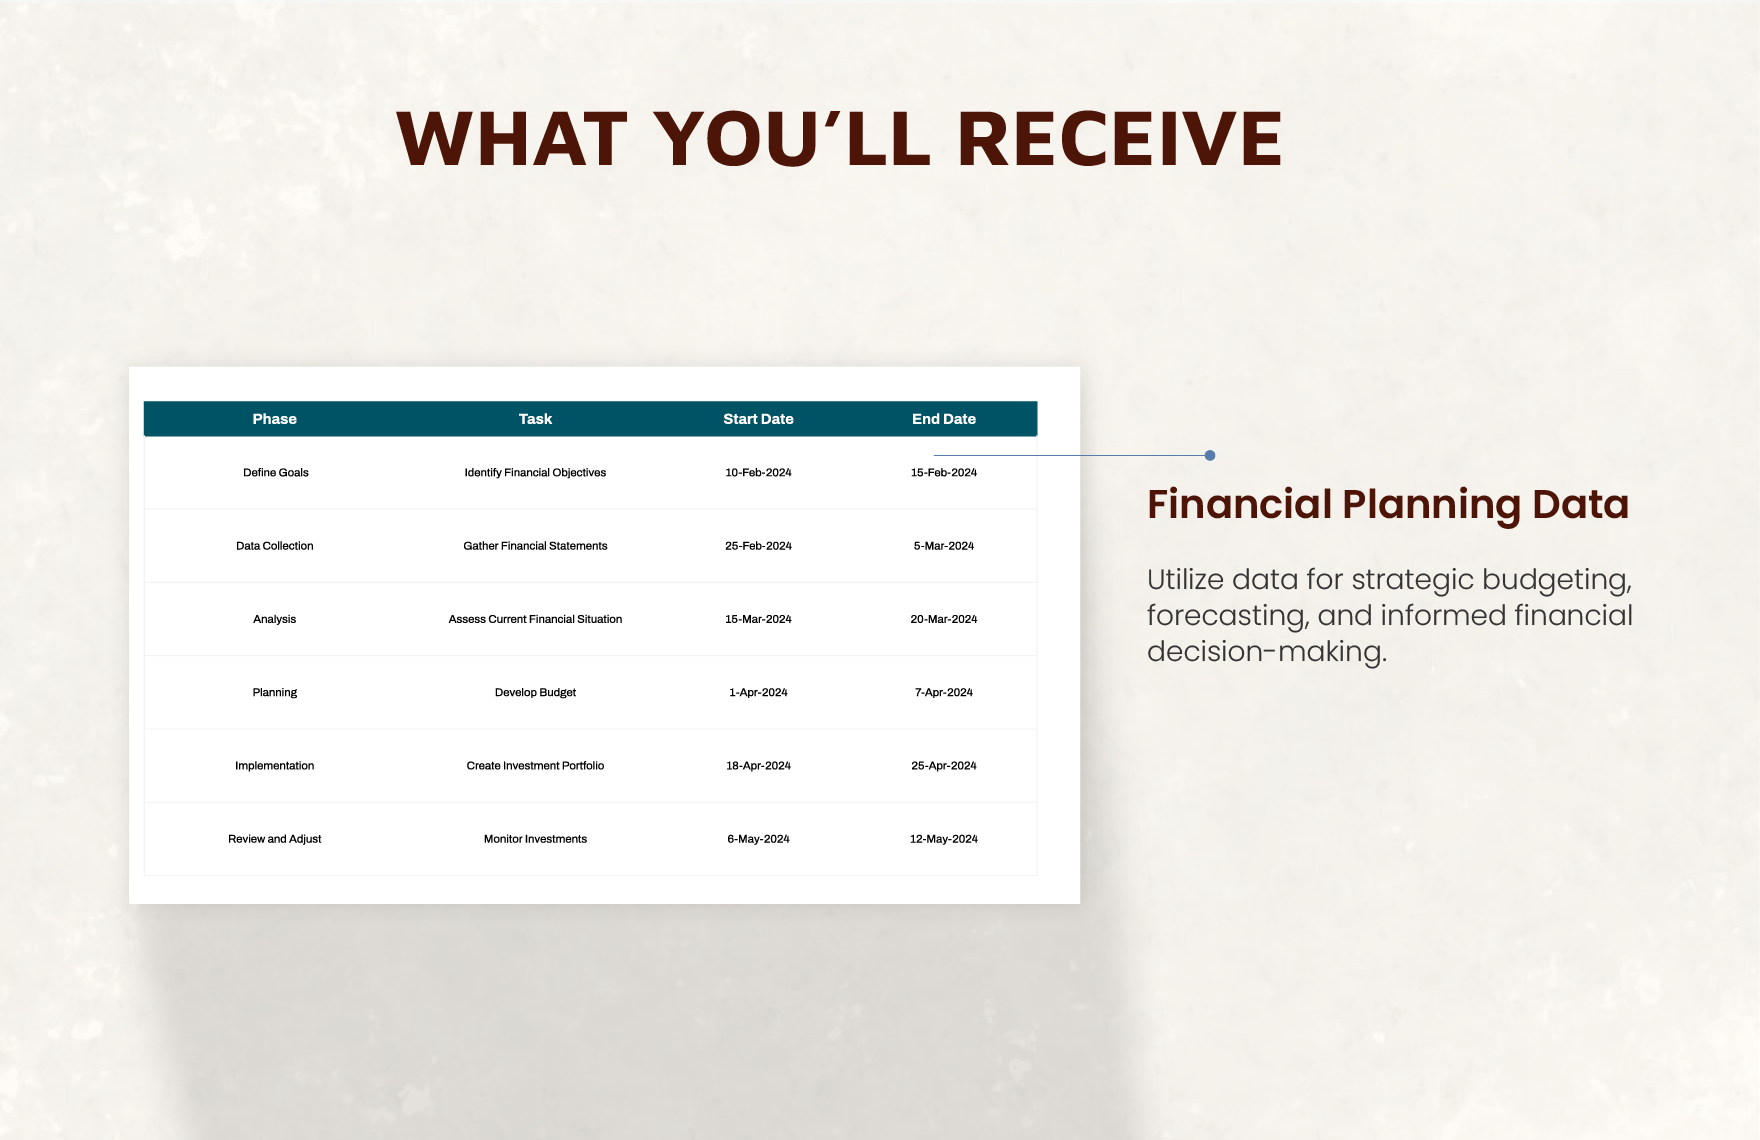 Financial Planning Project Roadmap Template